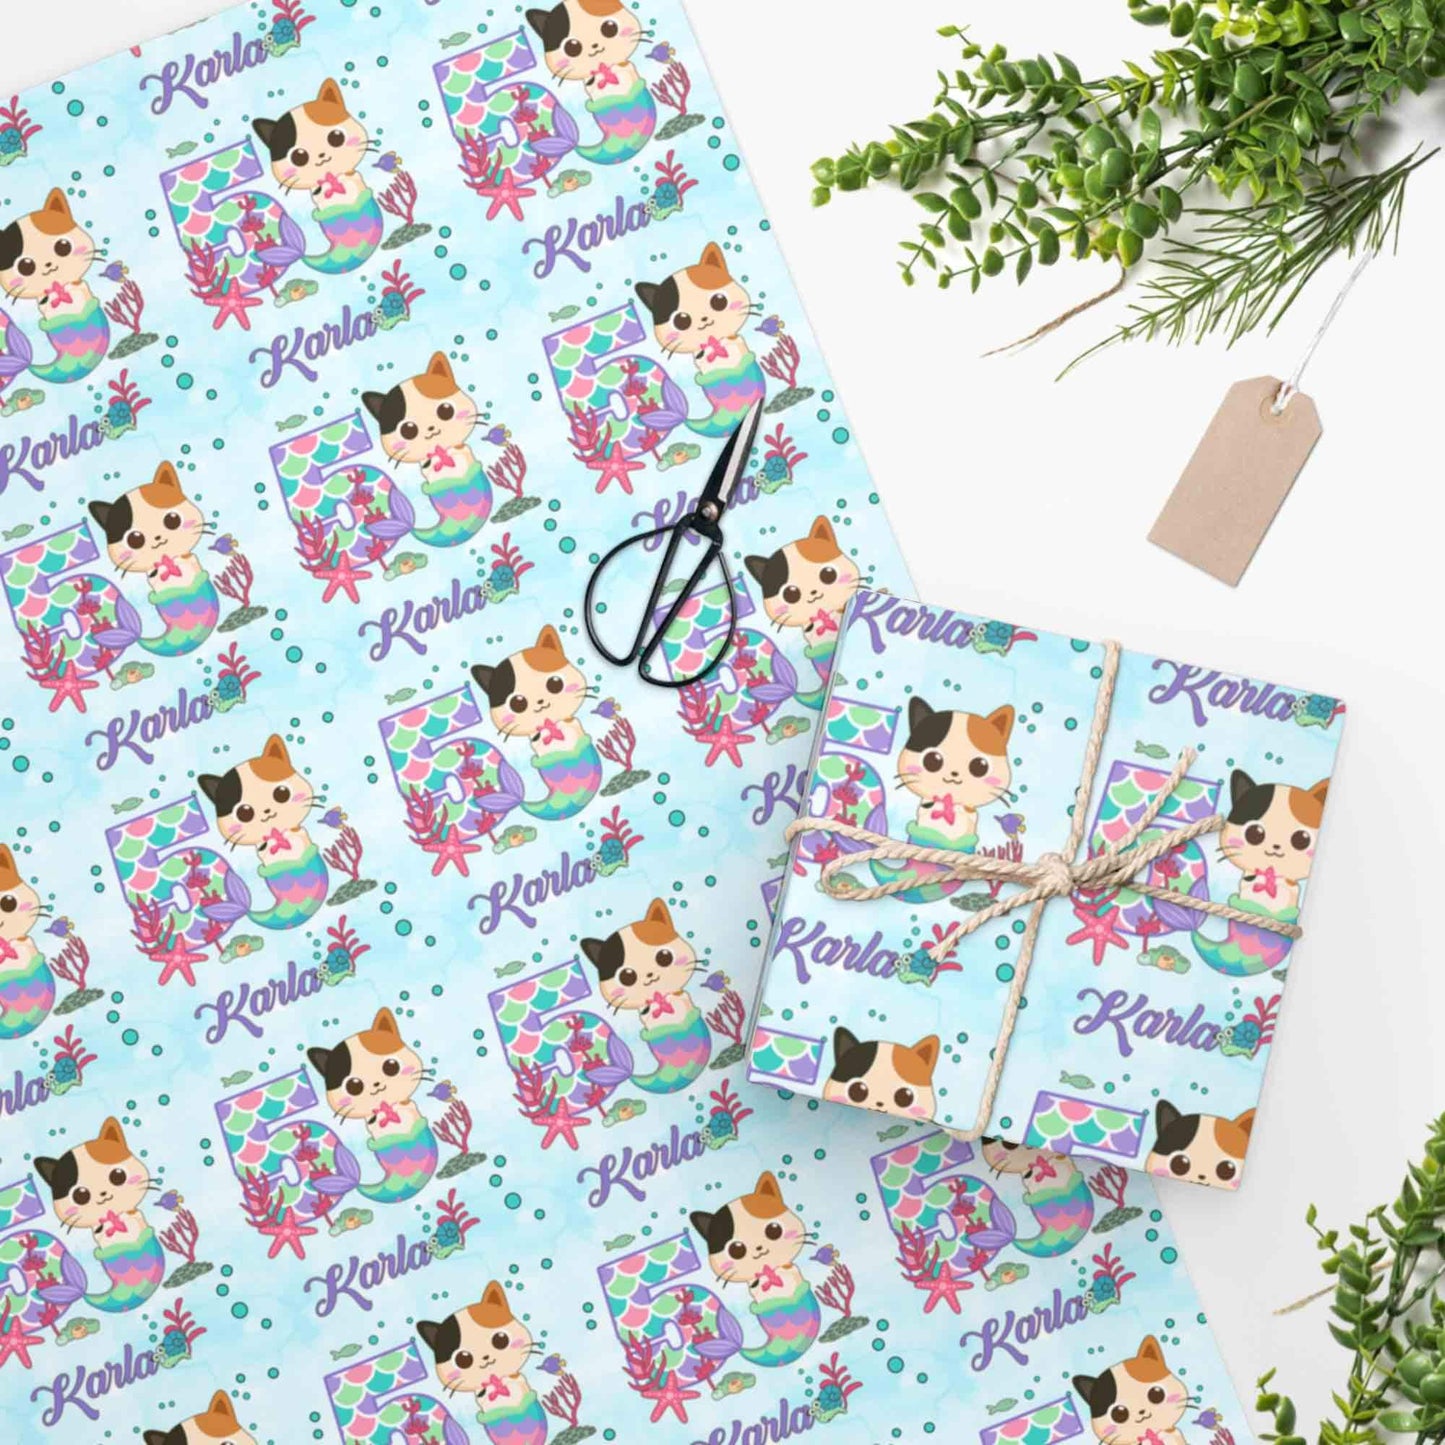 Personalized Meowmaid Gift Wrapping Paper Roll, Mermaid Cat Birthday Gift Wrap Paper, Christmas Wrapping, Baby Shower Name Wrapping Paper